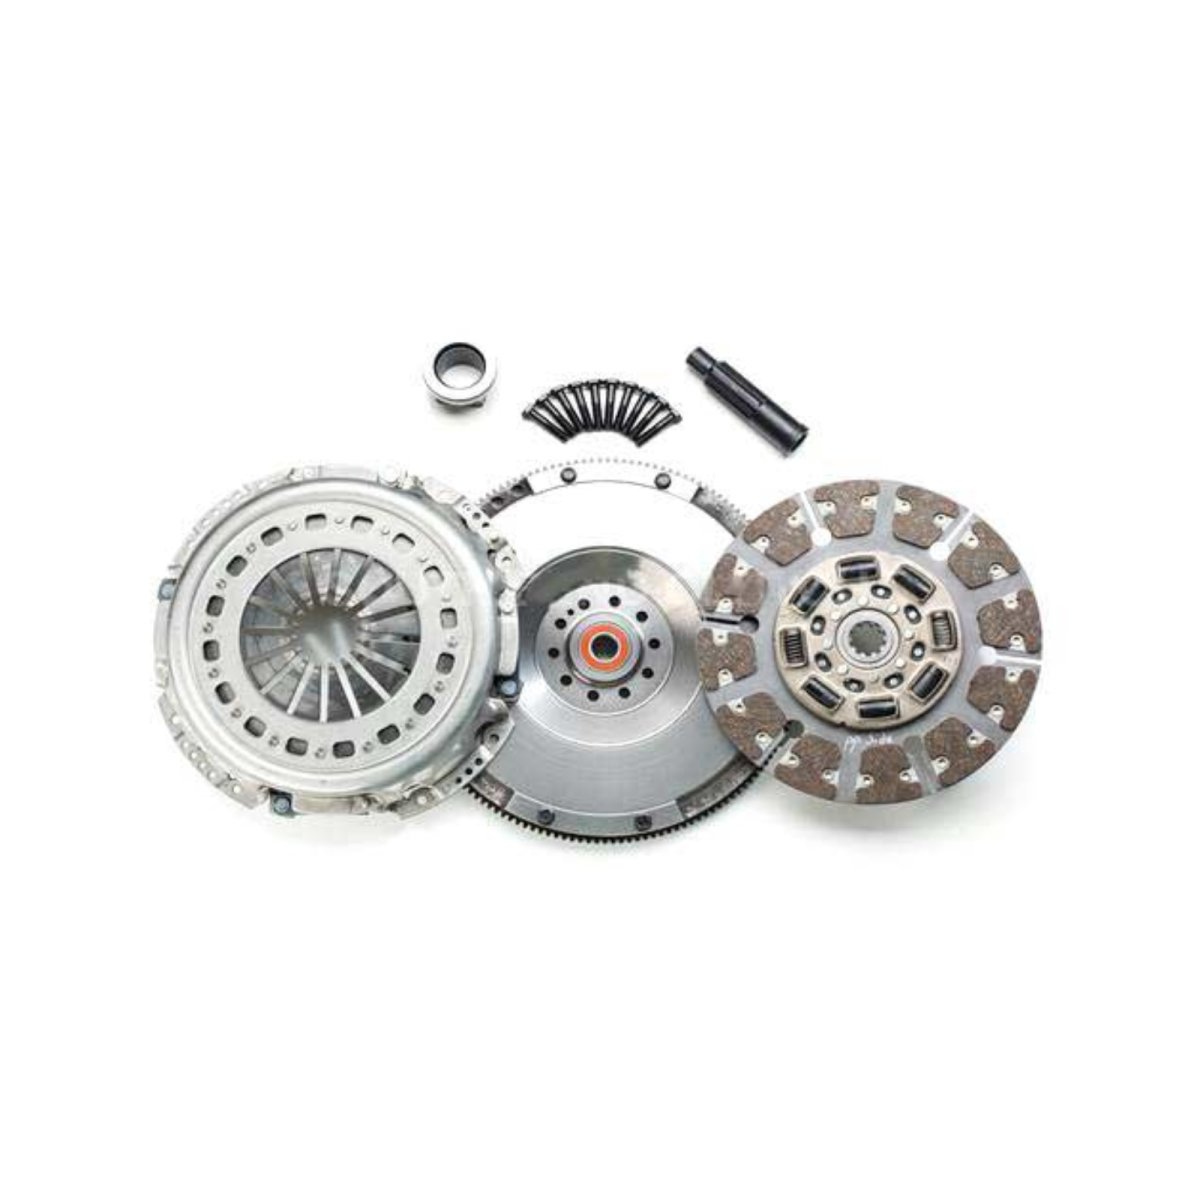 South Bend Clutch - South Bend Heavy Duty Clutch Upgrade For 2008-2010 Ford 6.4L Powerstroke Diesel